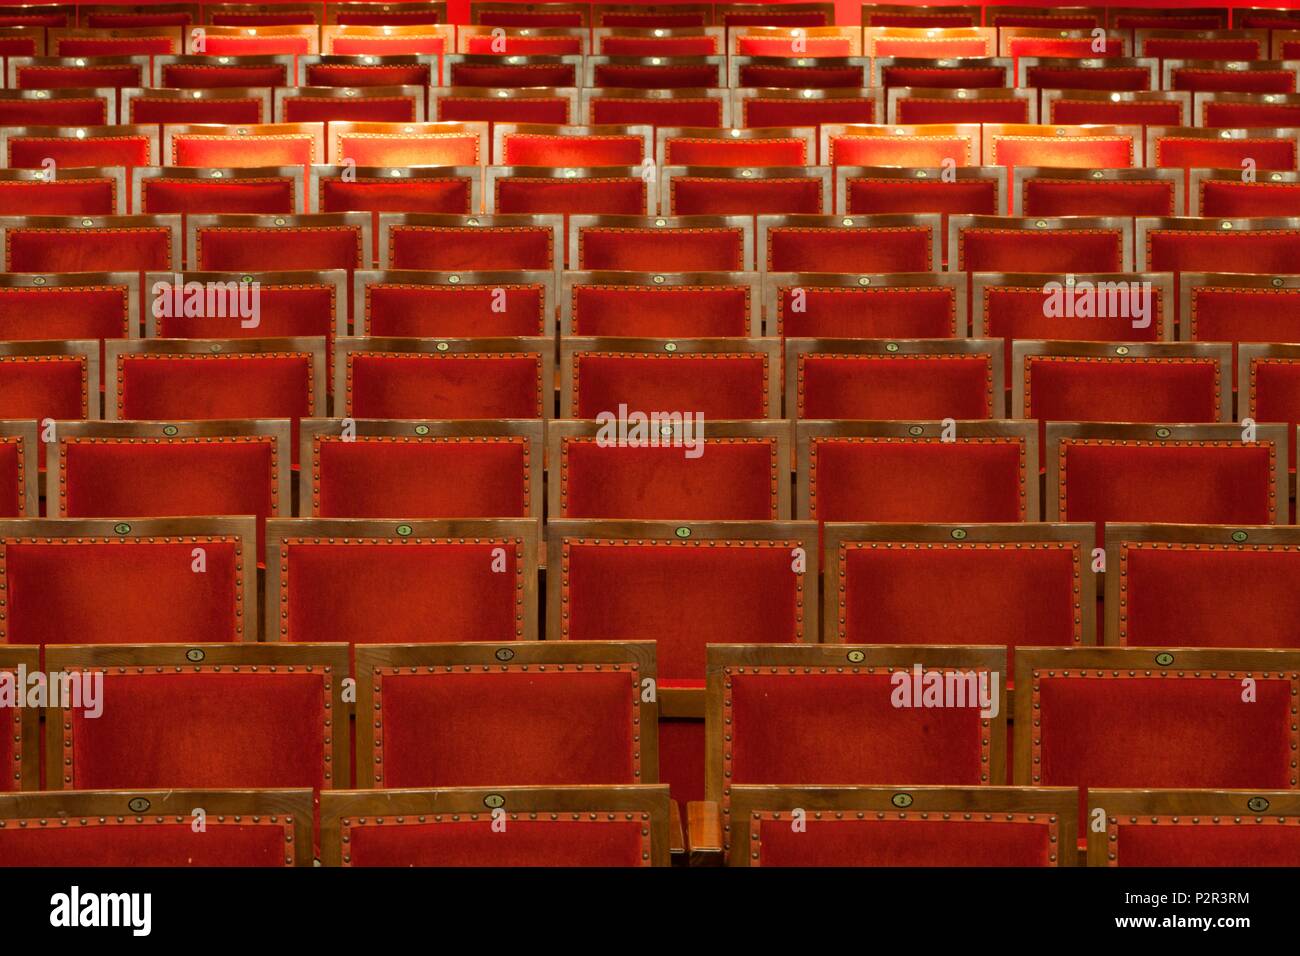 De 493 High Resolution Stock Photography and Images - Alamy